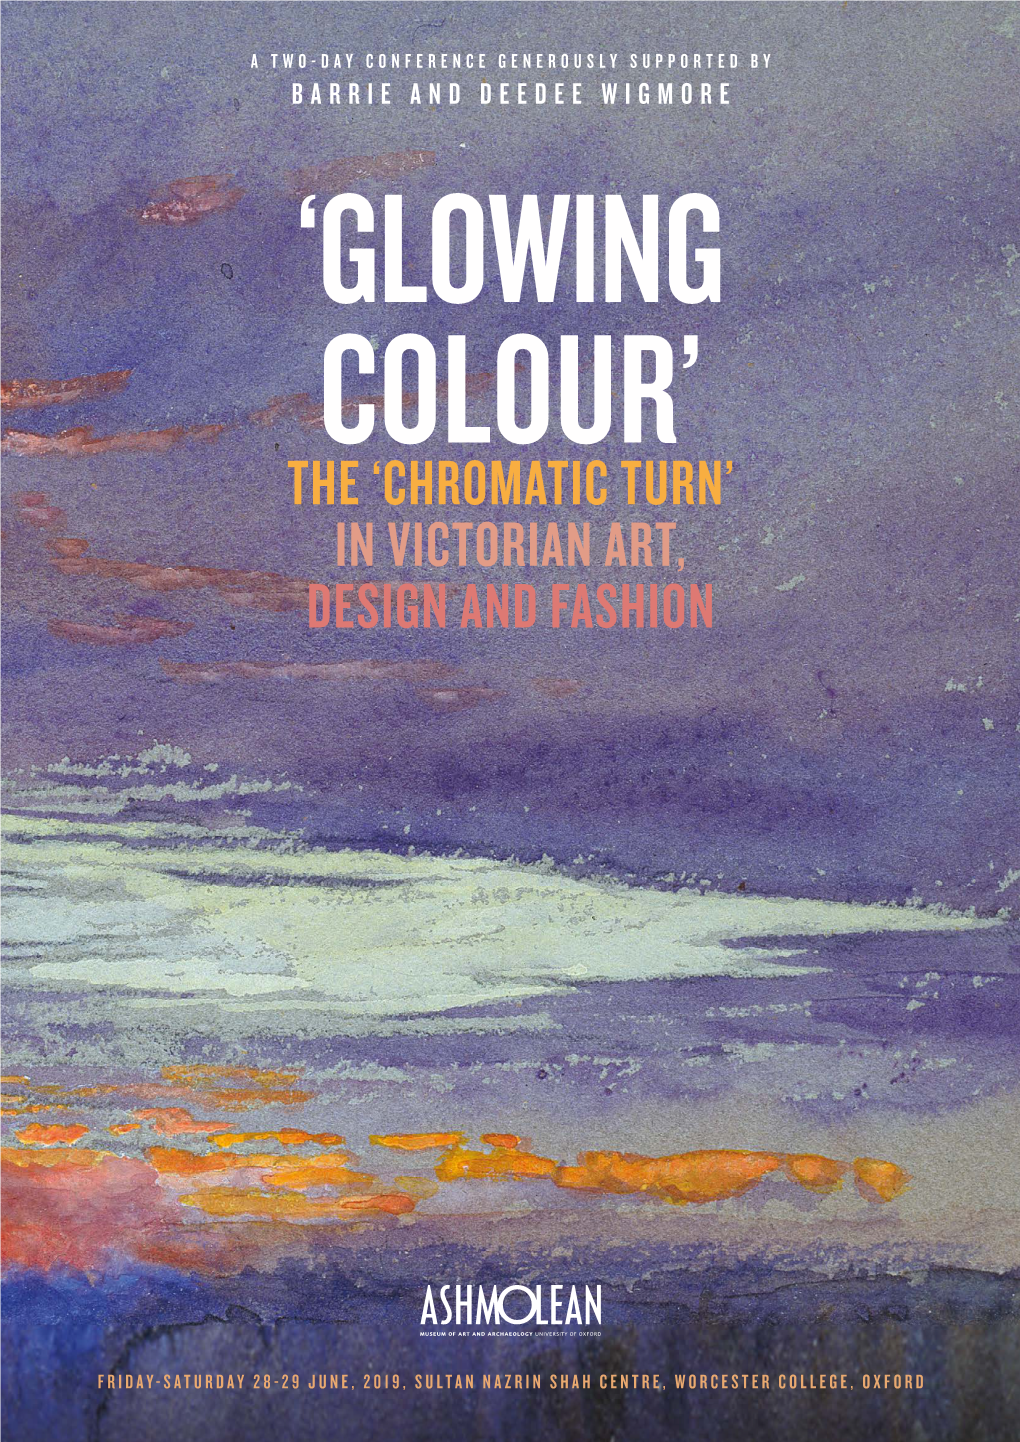 The 'Chromatic Turn' in Victorian Art, Design And